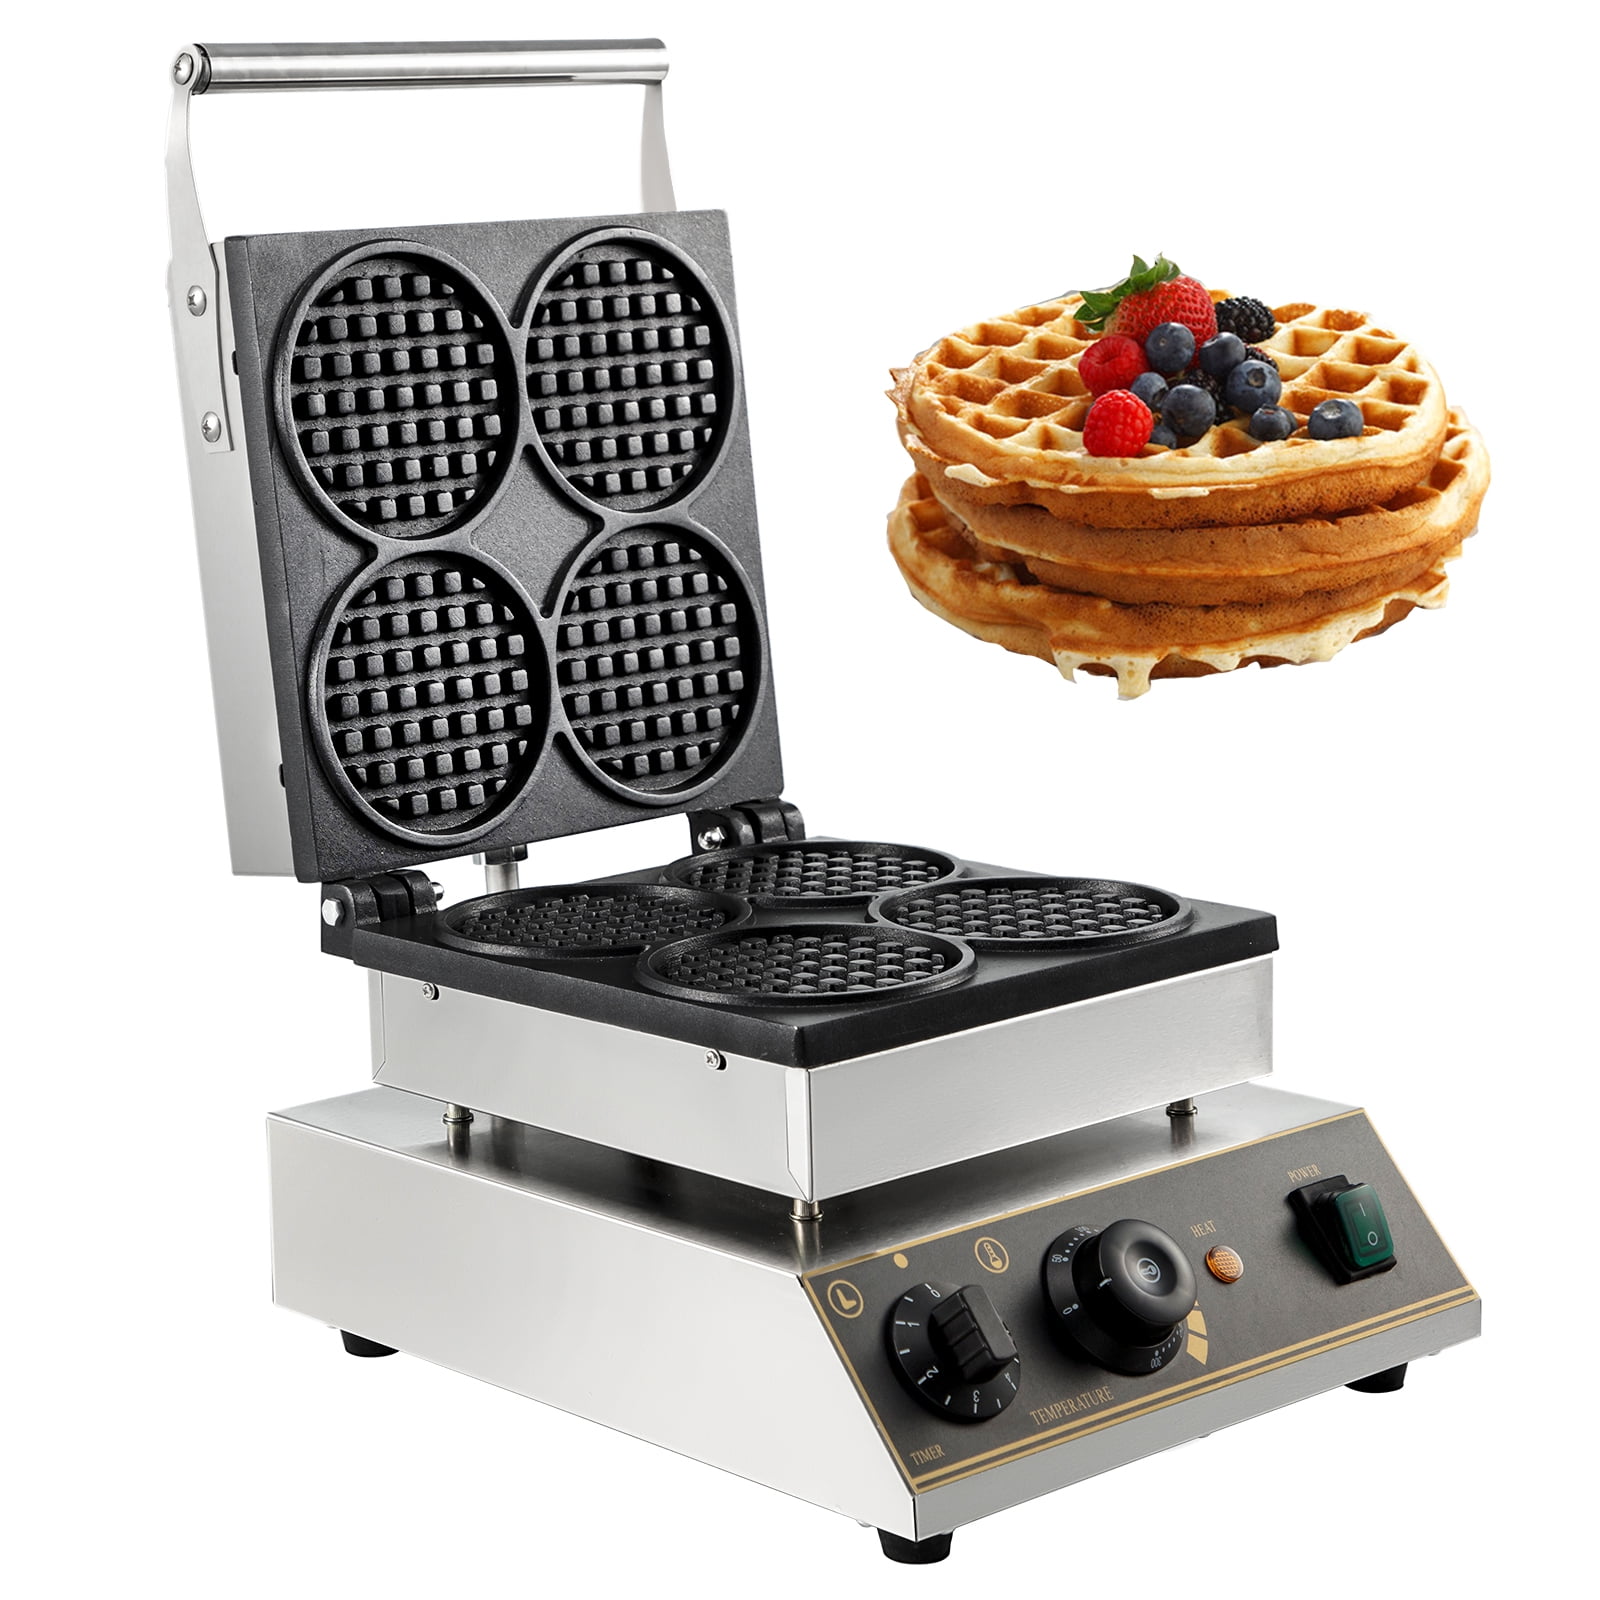 Black Homend 6Pcs Commercial Lolly Waffle Makers Non-Stick Lolly French Hotdog Making Machine Stainless Steel Crispy Machine 110V 